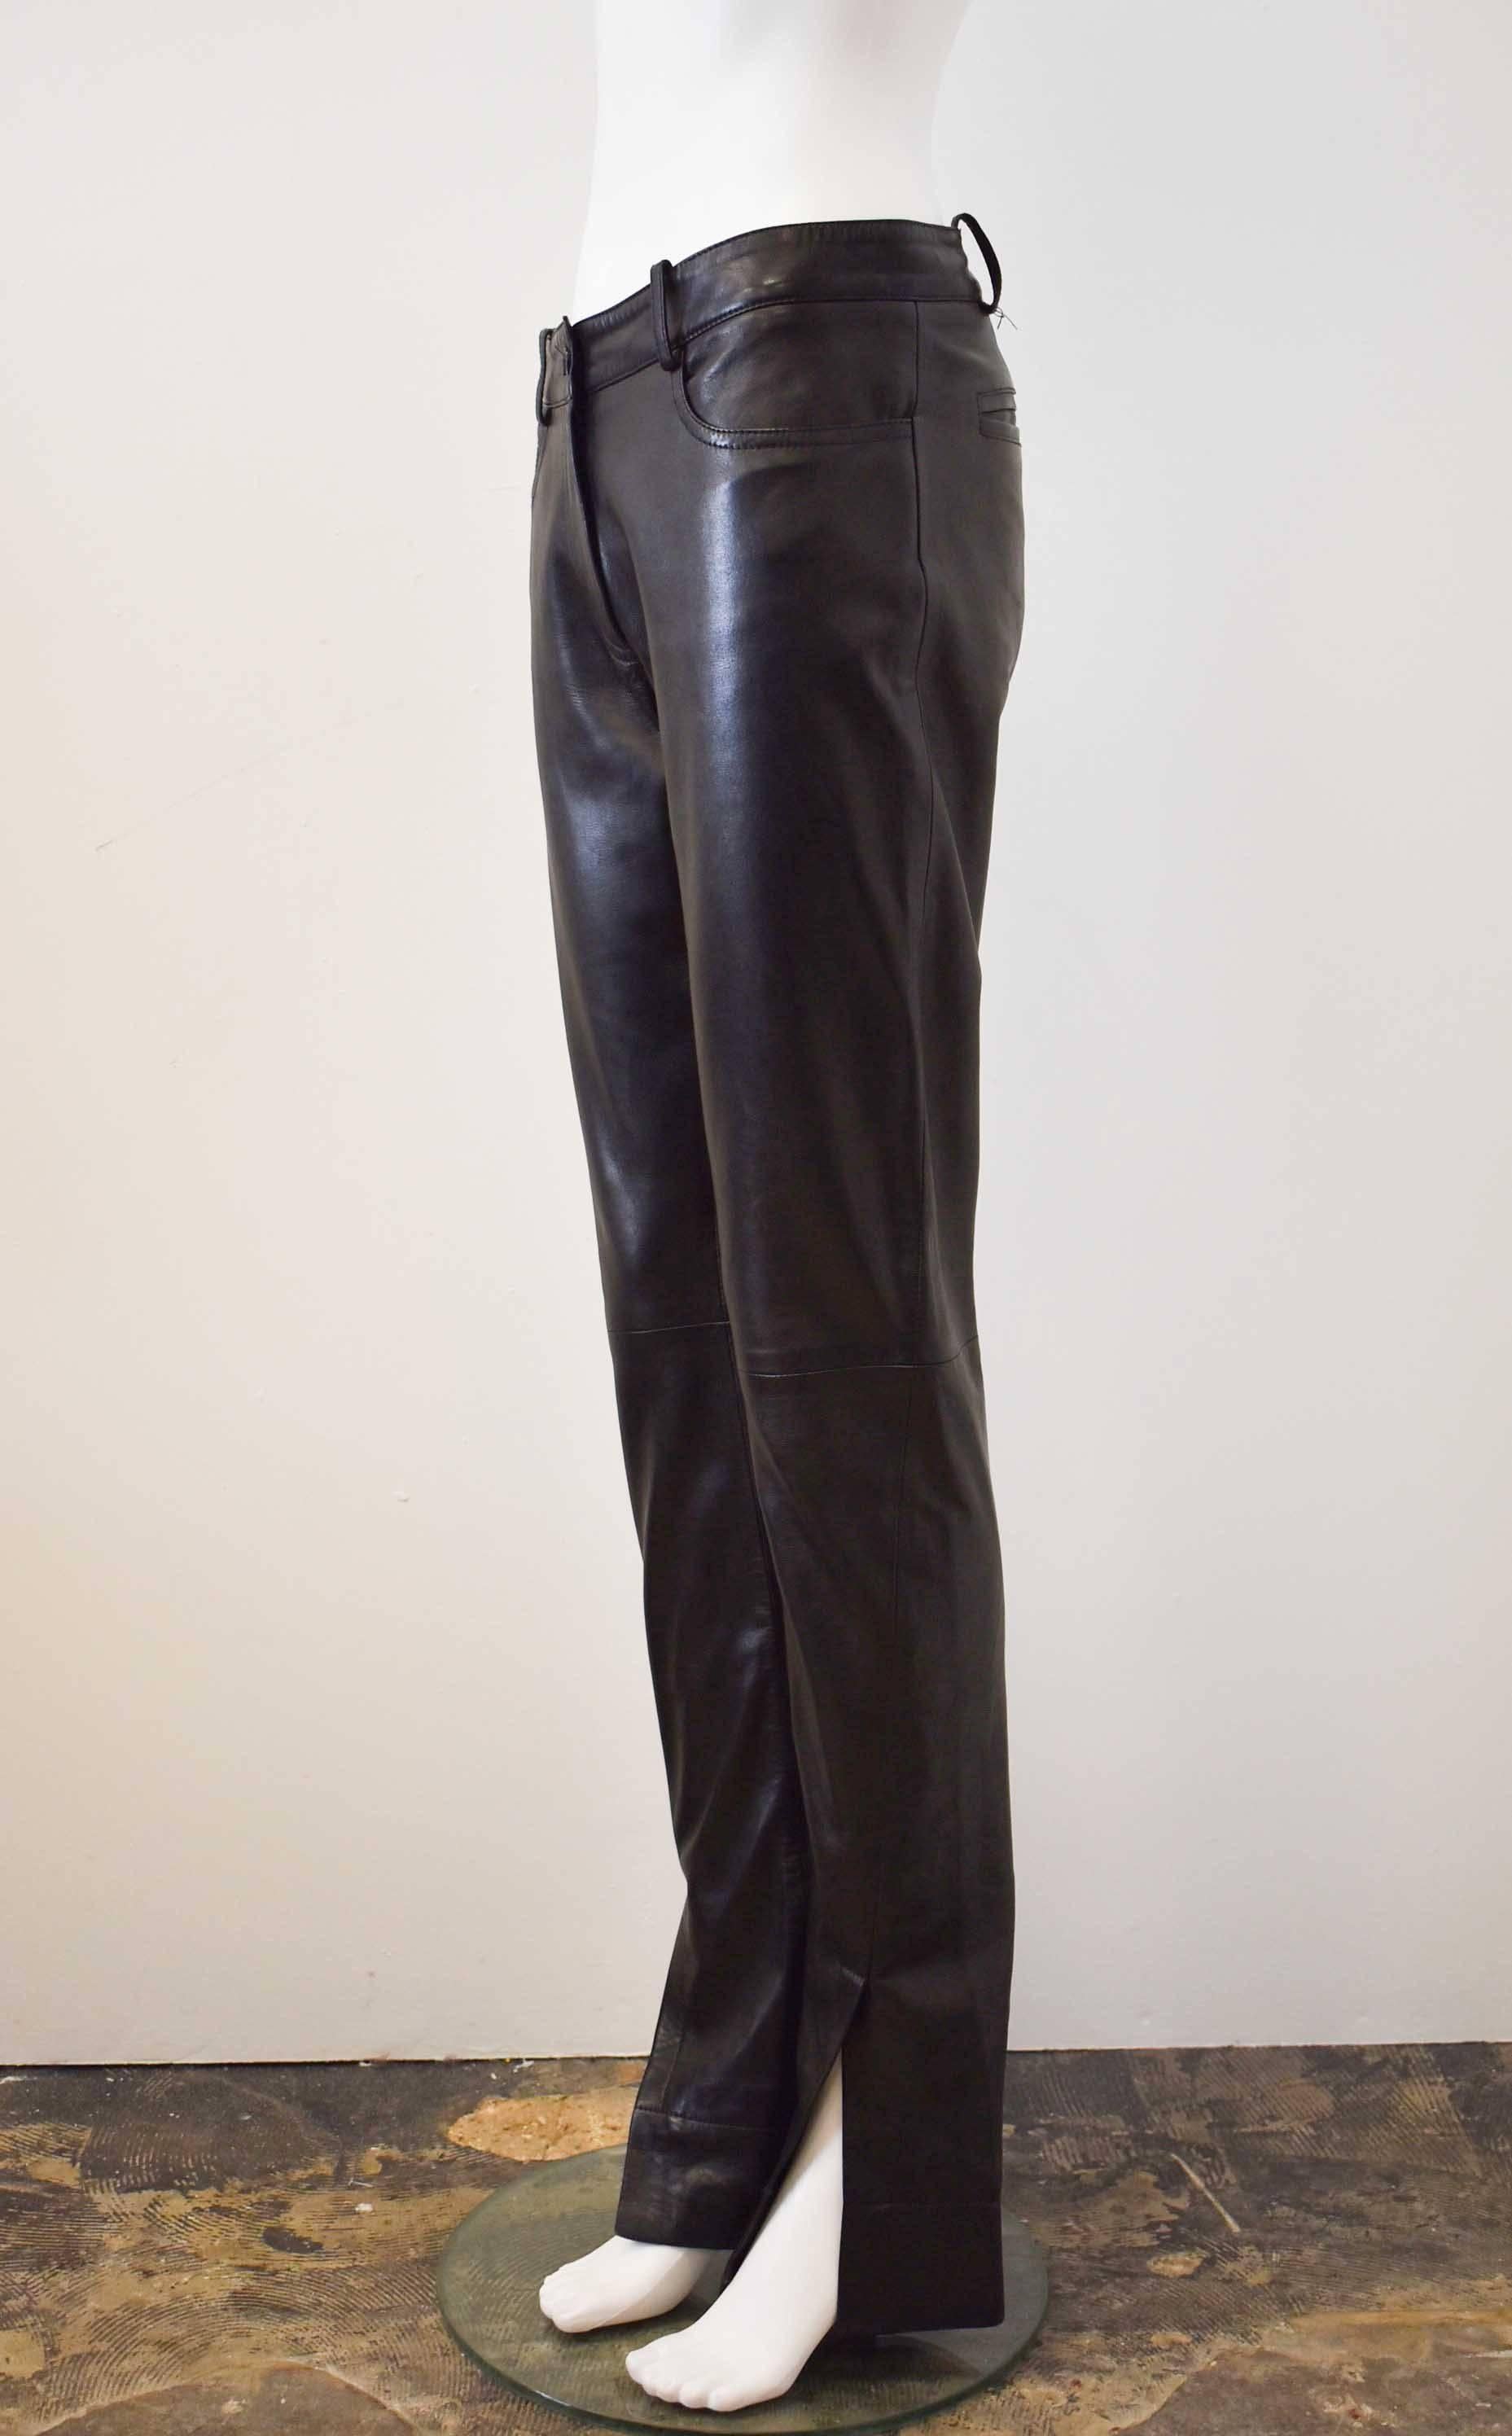 A pair of black, butter-soft leather trousers from Celine. The trousers have a straight, long cut with slits at the cuff, and have a stitch at the knee. They are made from 100% leather and have two pockets at the hip and two at the back.